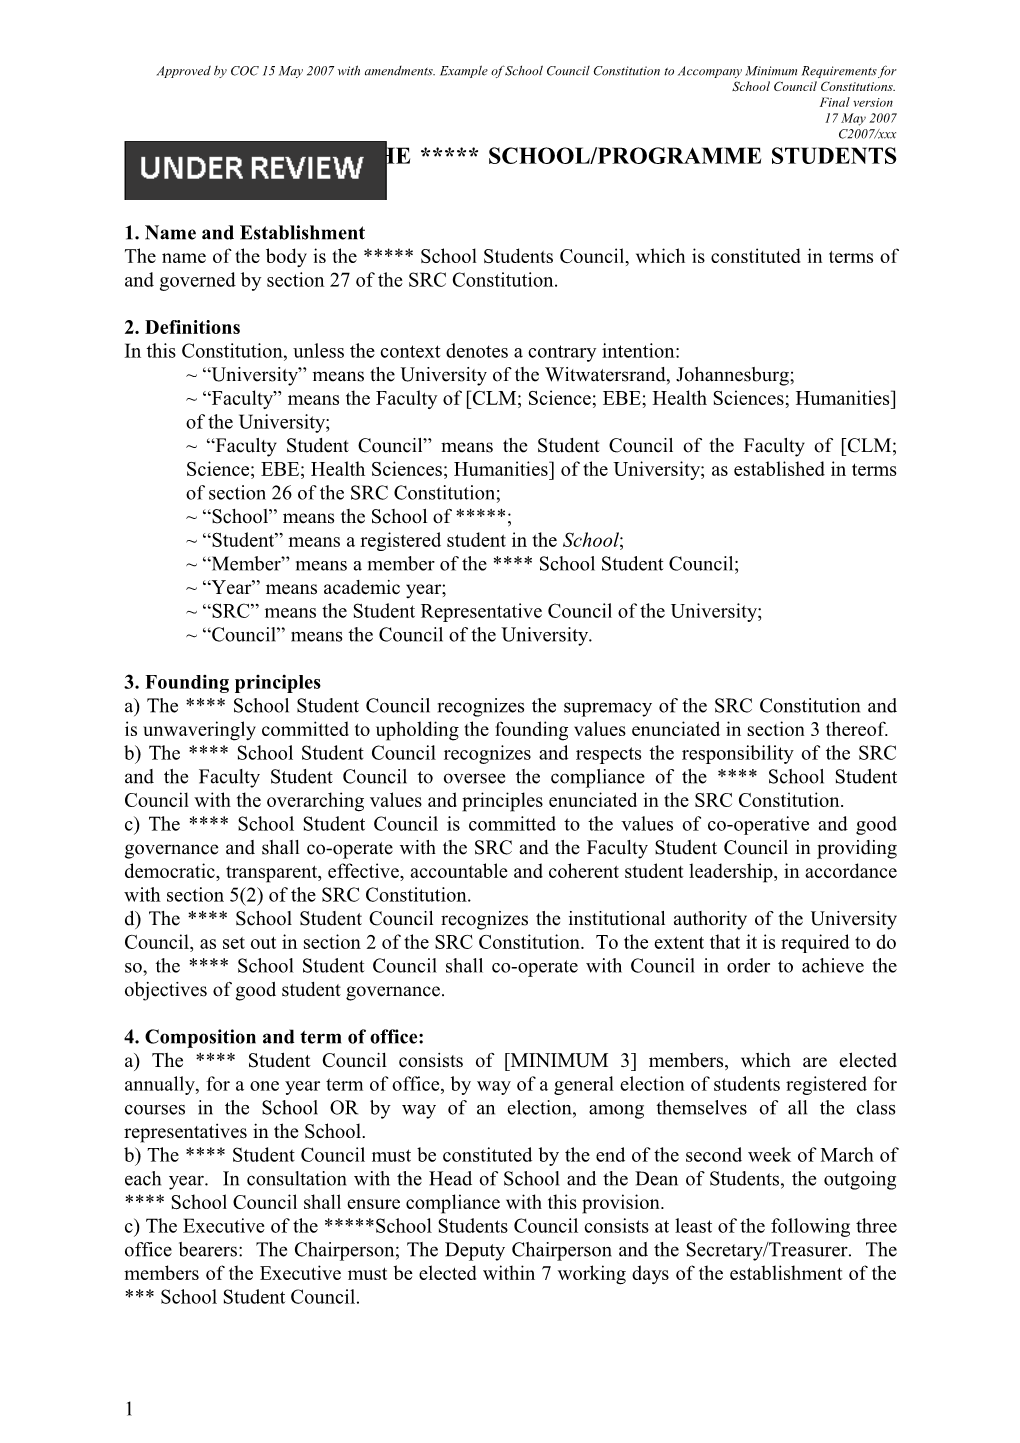 Constitution of the School Students Council